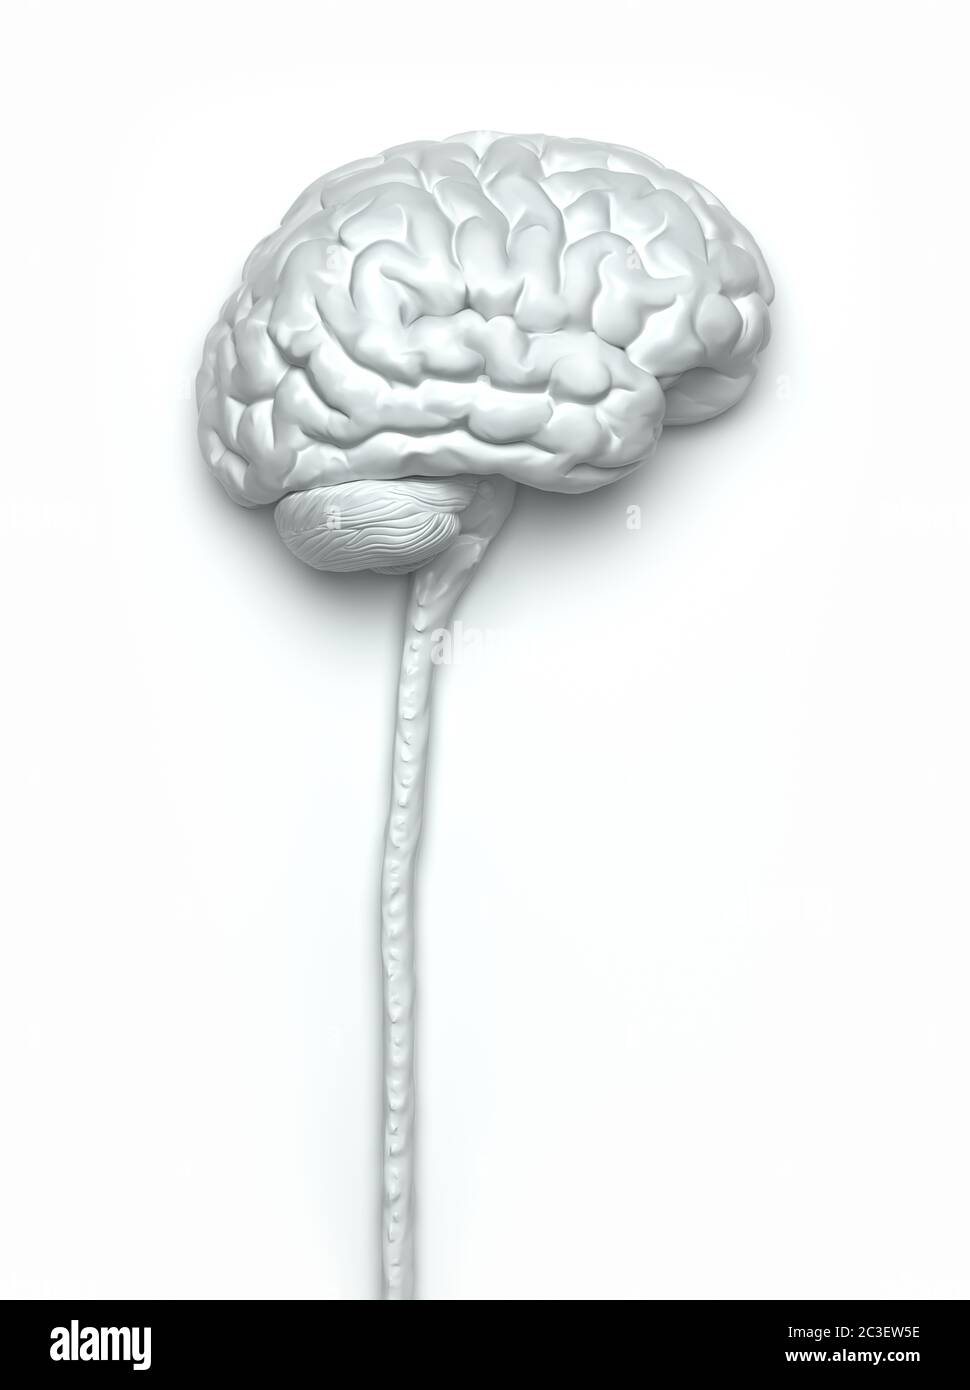 Human brain and spinal cord, illustration. Stock Photo